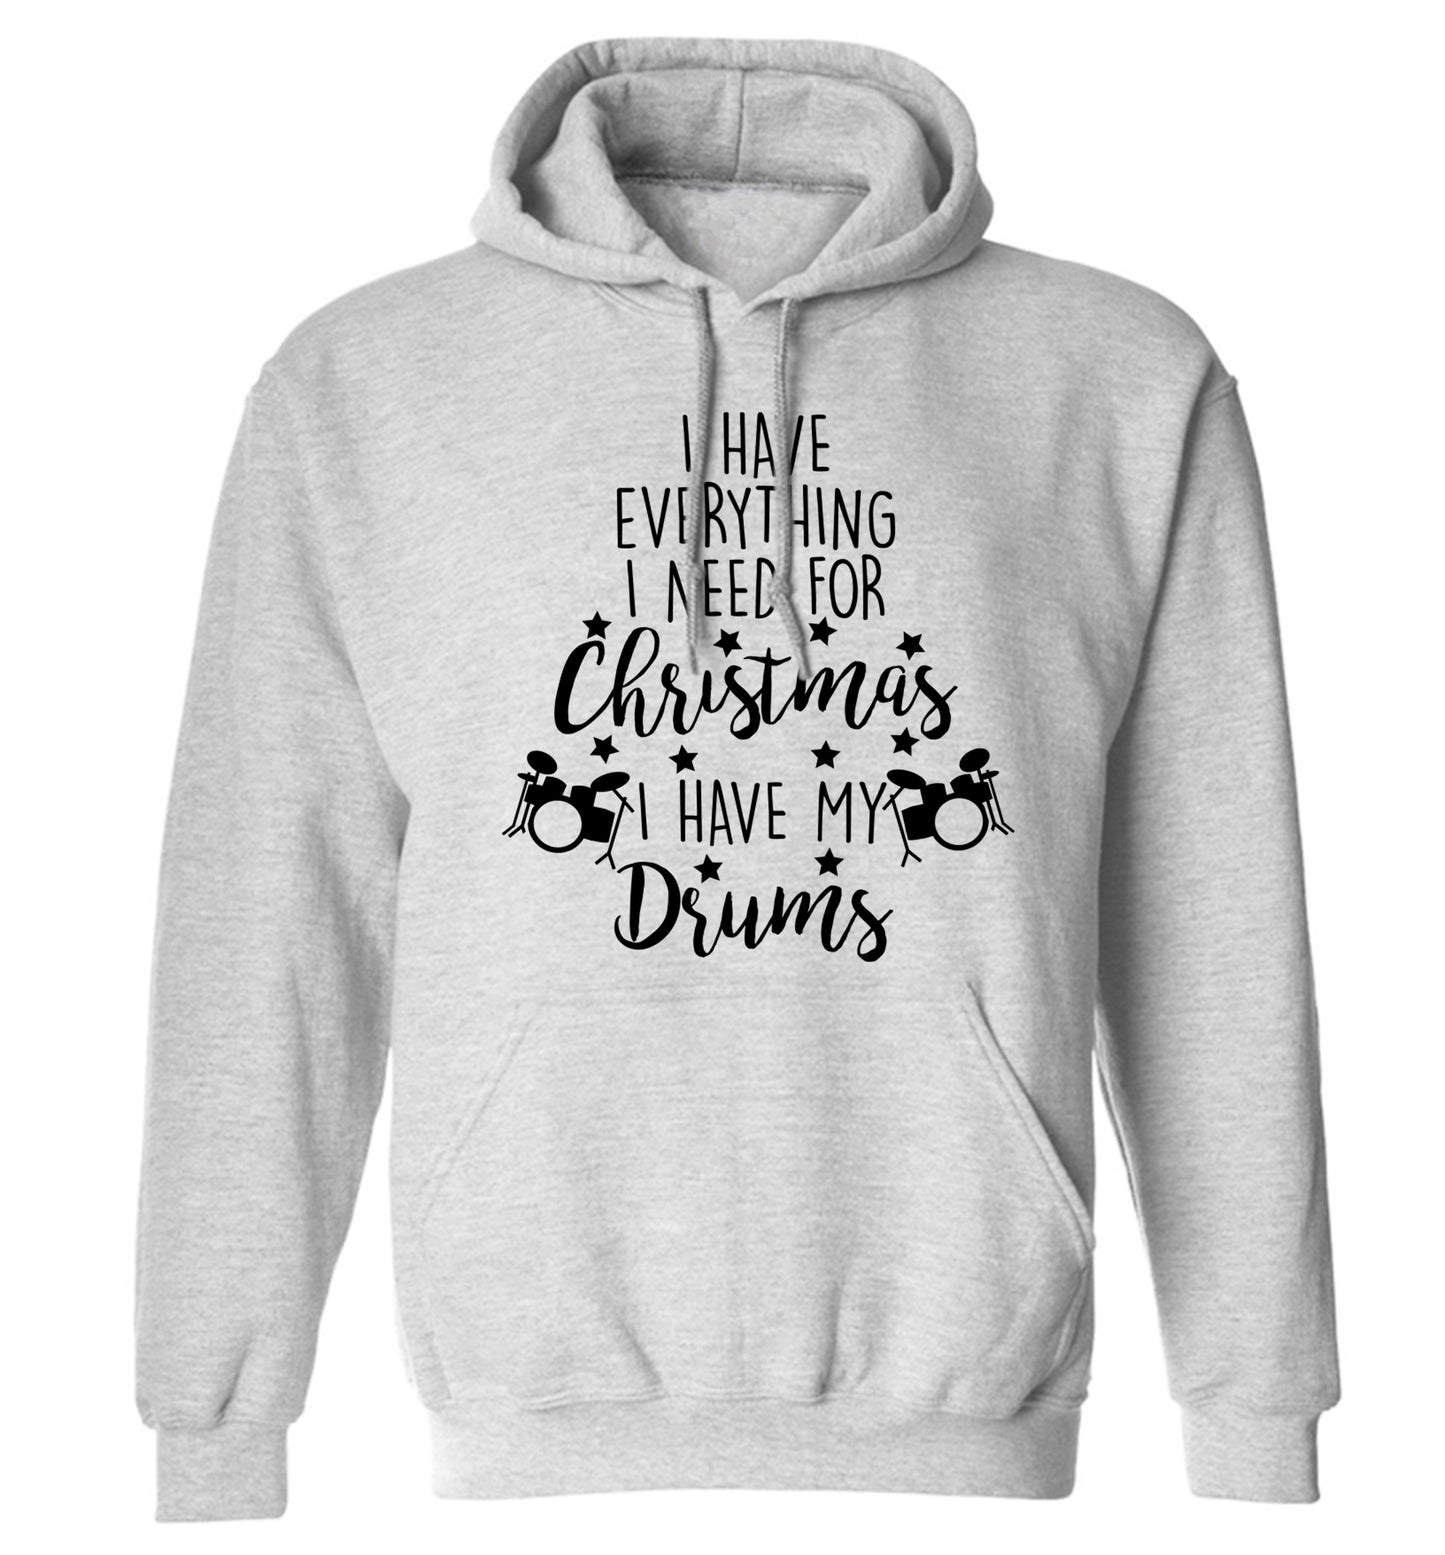 I have everything I need for Christmas I have my drums! adults unisex grey hoodie 2XL